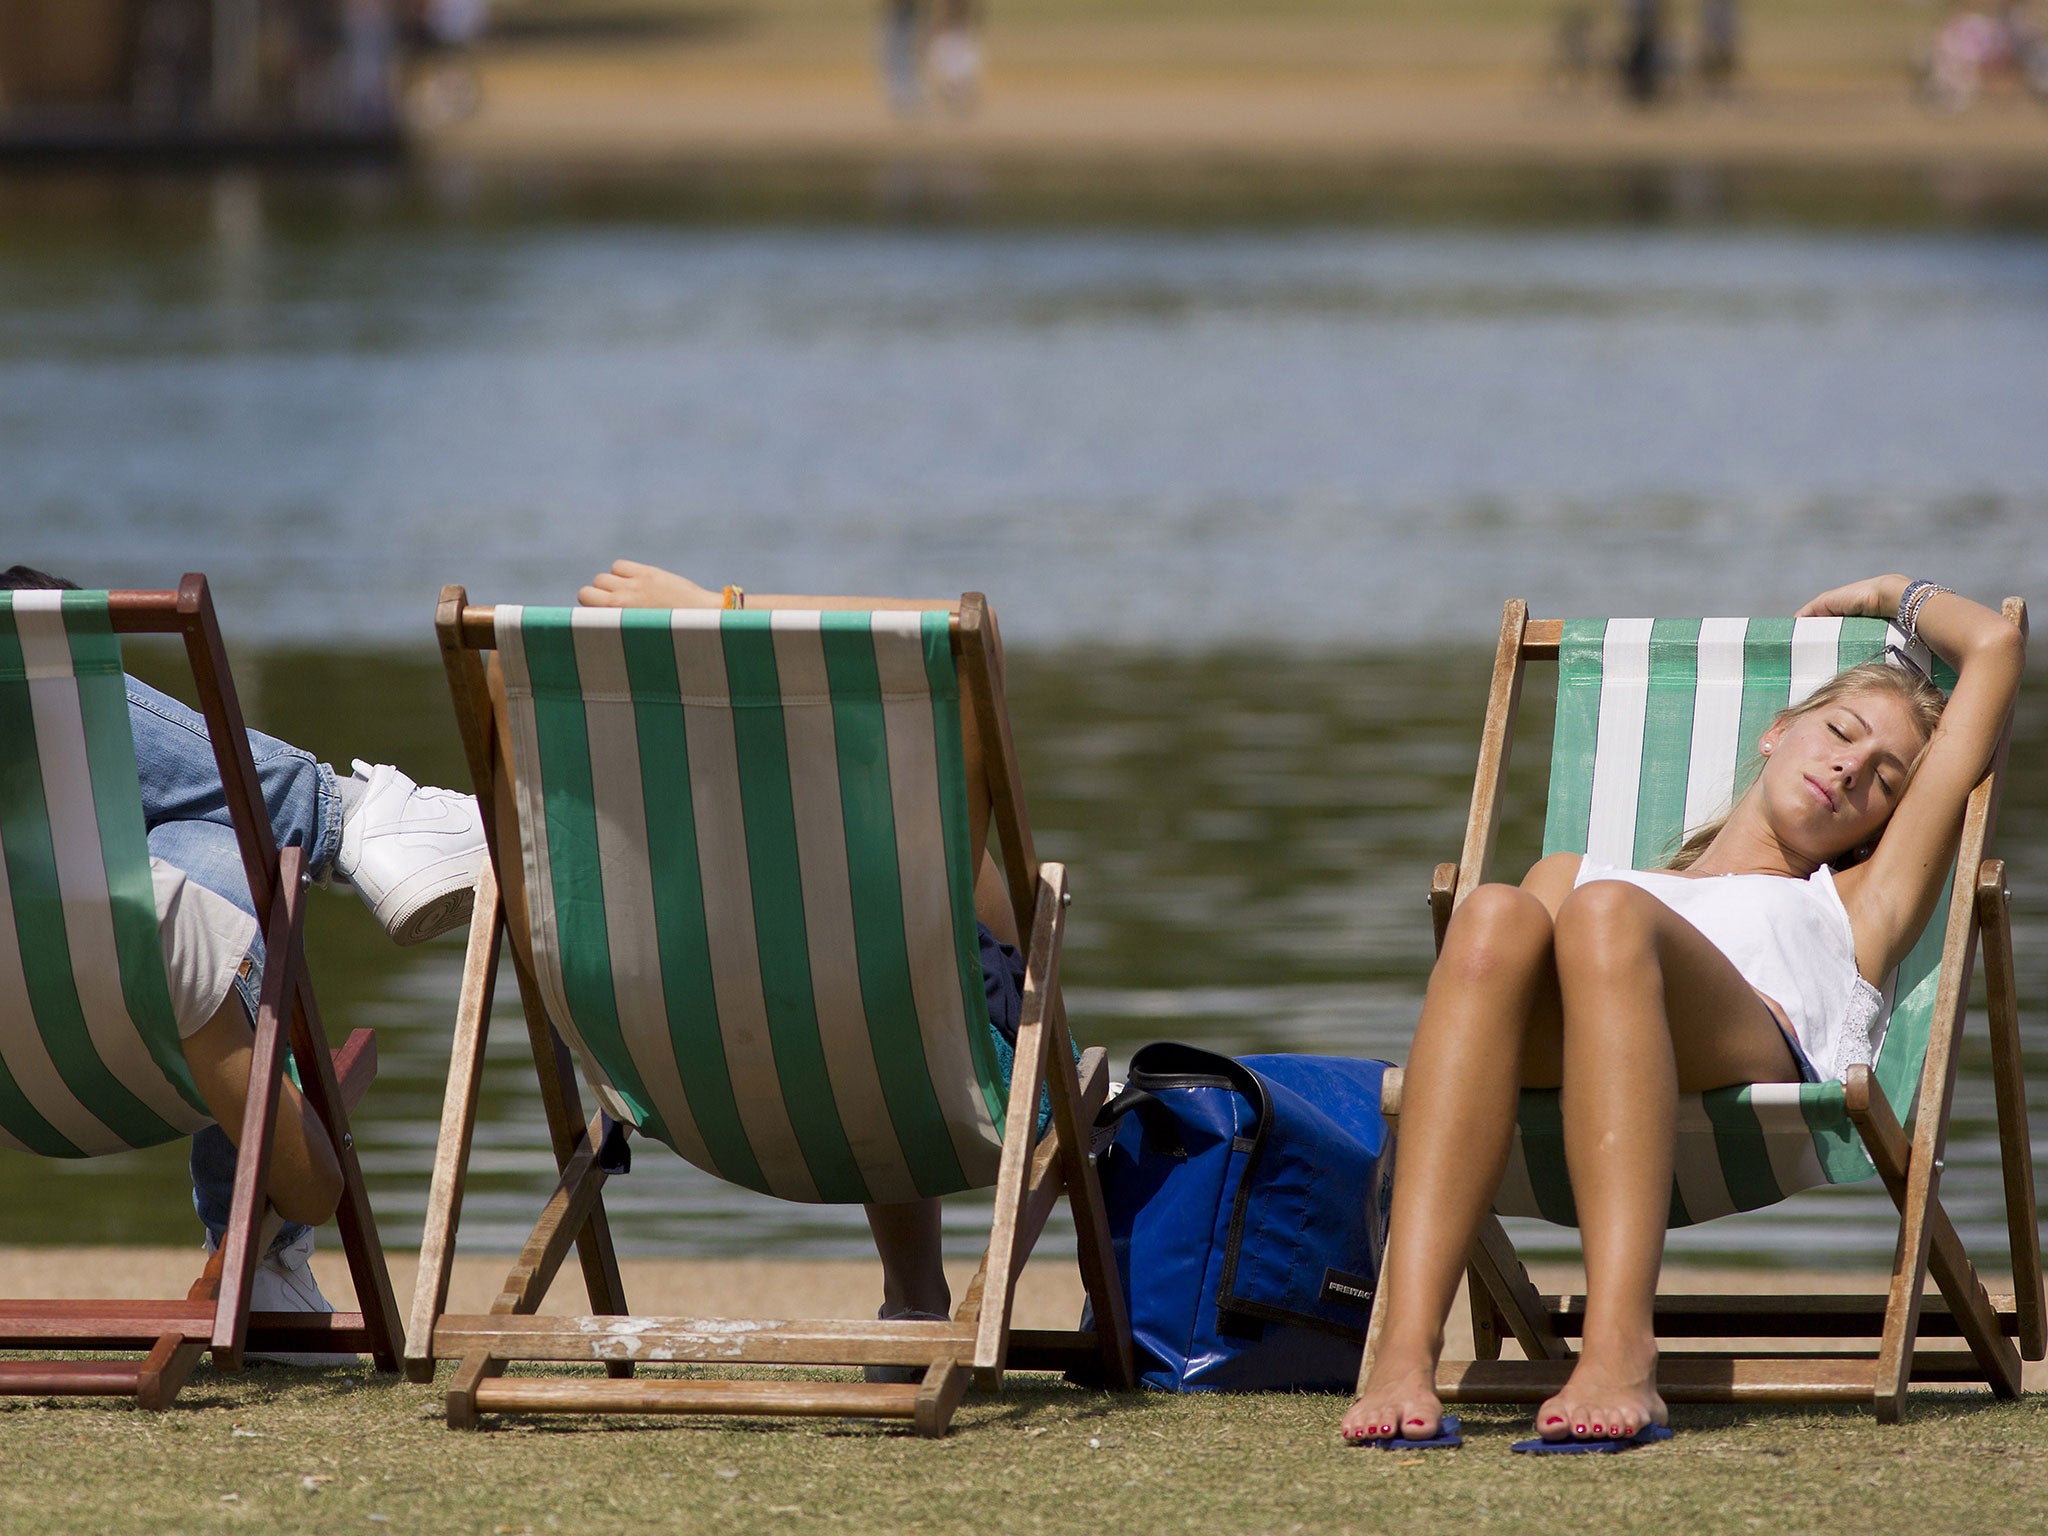 A woman rests on a deckchair by the Serpentine lake in Hyde Park, central London as England basks in warm weather